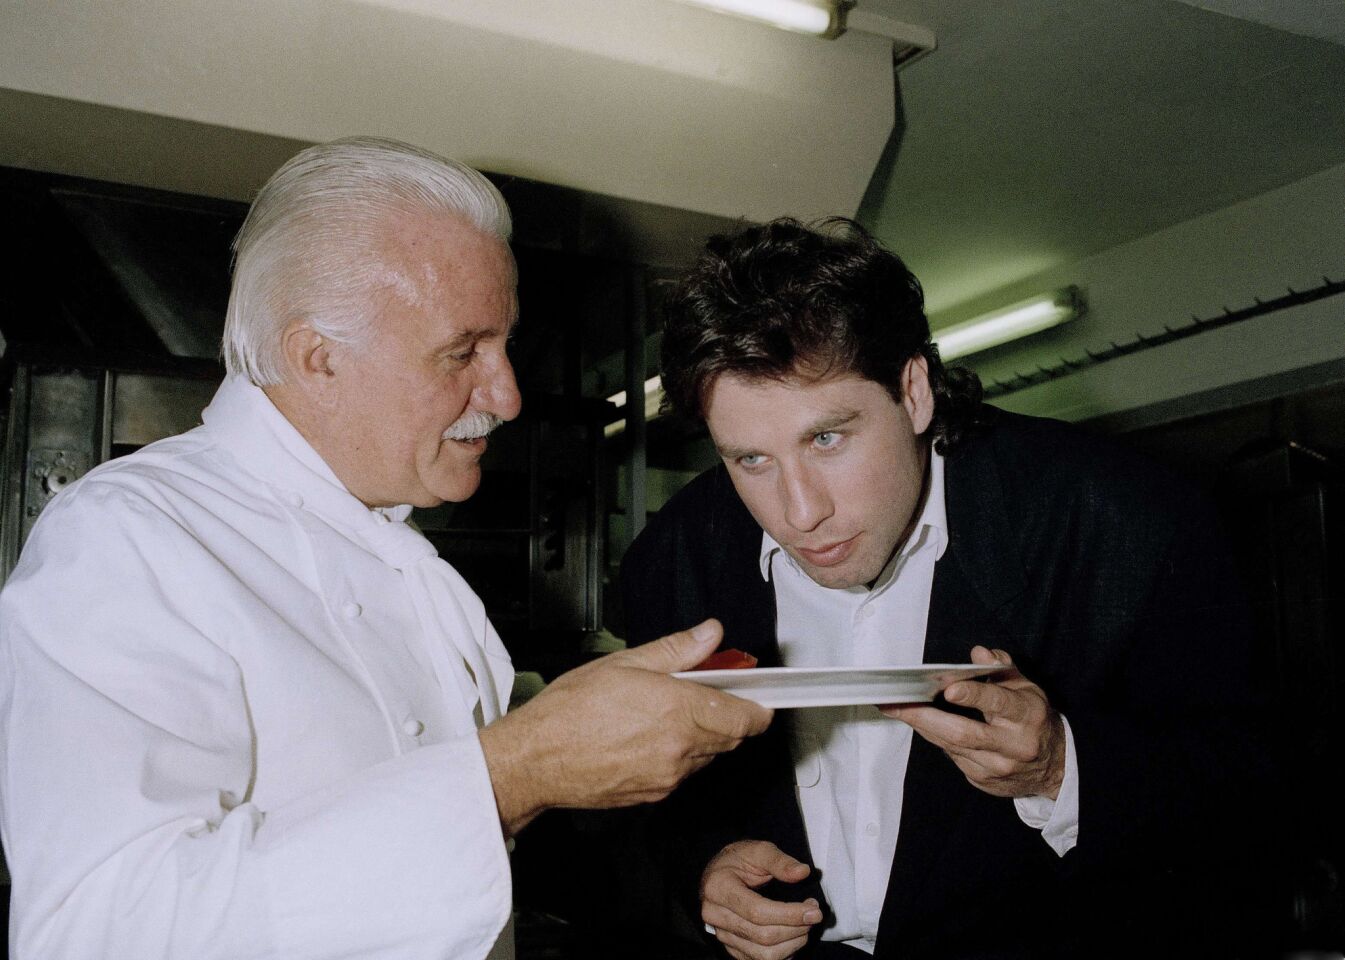 One of the first superstar chefs, Vergé, pictured here with actor John Travolta, was known for light, fresh and artfully plated food. He turned his restaurant, Le Moulin de Mougins in France, into a landmark of French gastronomy and a beacon of nouvelle cuisine. He was 85. Full obituary